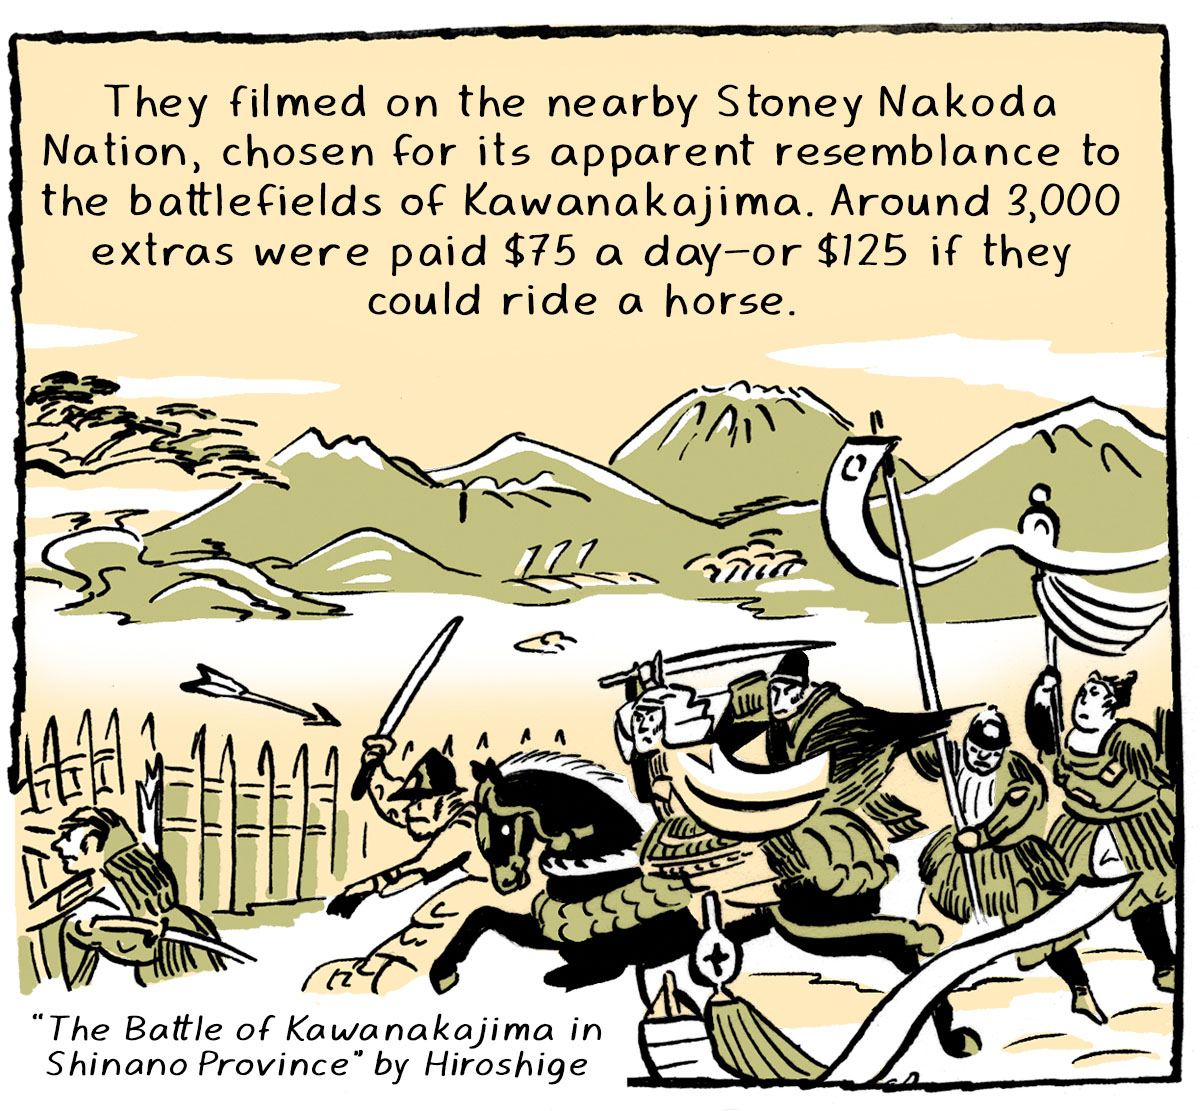 “They filmed on the nearby Stoney Nakoda Nation, chosen for its apparent resemblance to the battlefields of Kawanakajima. Around 3,000 extras were paid $75 a day–or $125 if they could ride a horse.” Men in armour are shown on horses, some holding up banners, as they charge into battle. The image is from a famous woodblock print and captioned “’The Battle of Kawanakajima in Shinano Province’ by Hiroshige.”